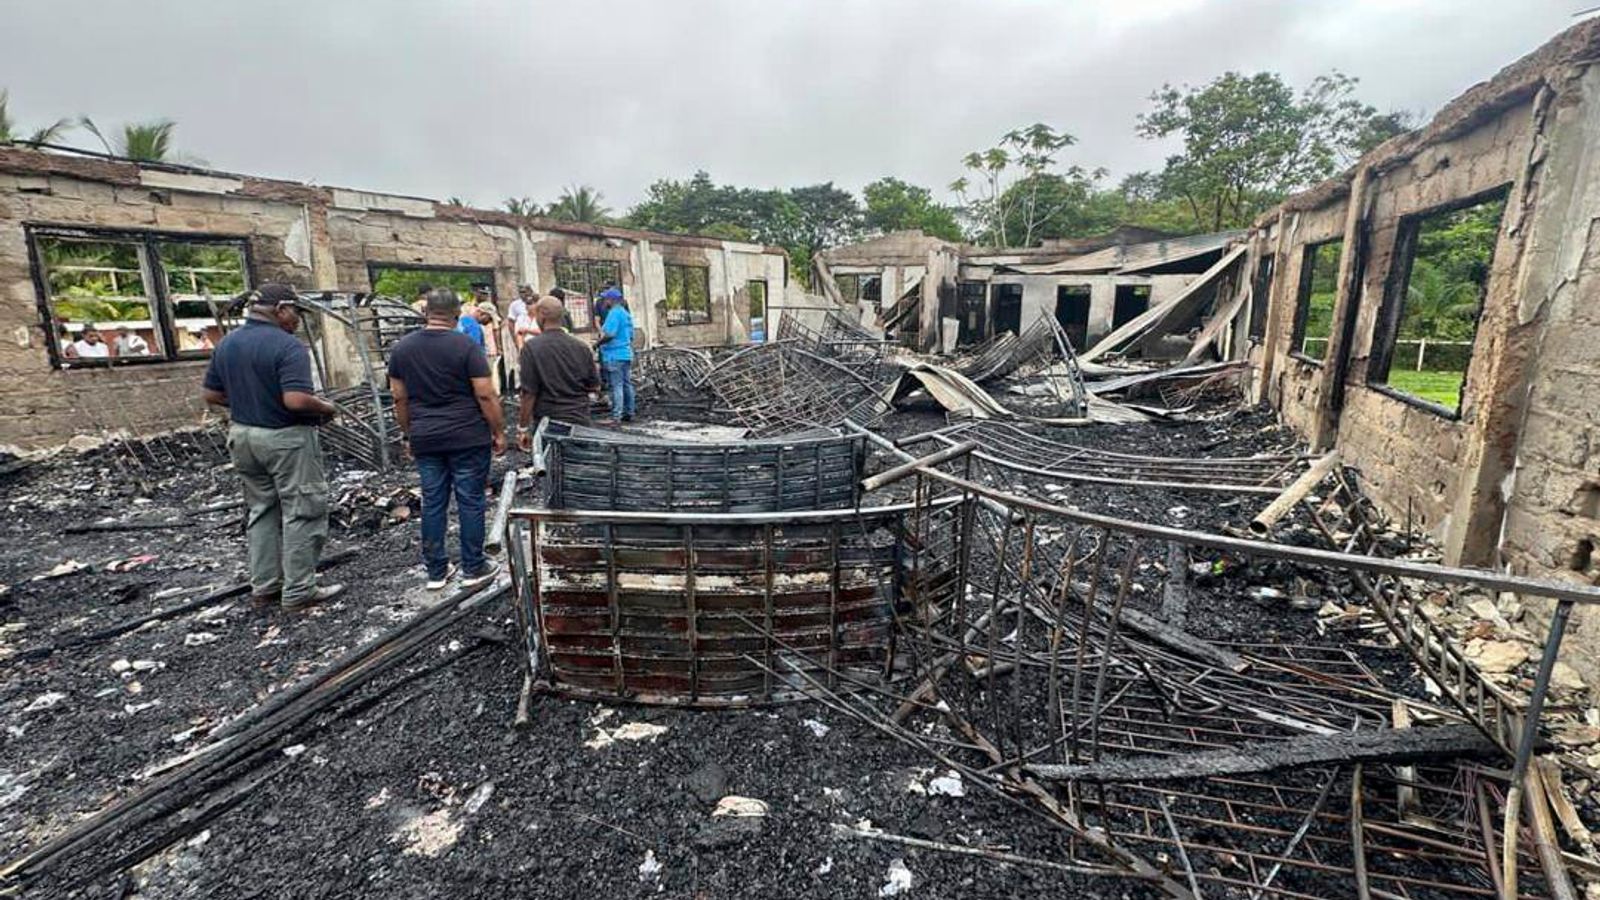 Guyana: 15-year-old girl charged as adult with murdering 19 people in school fire